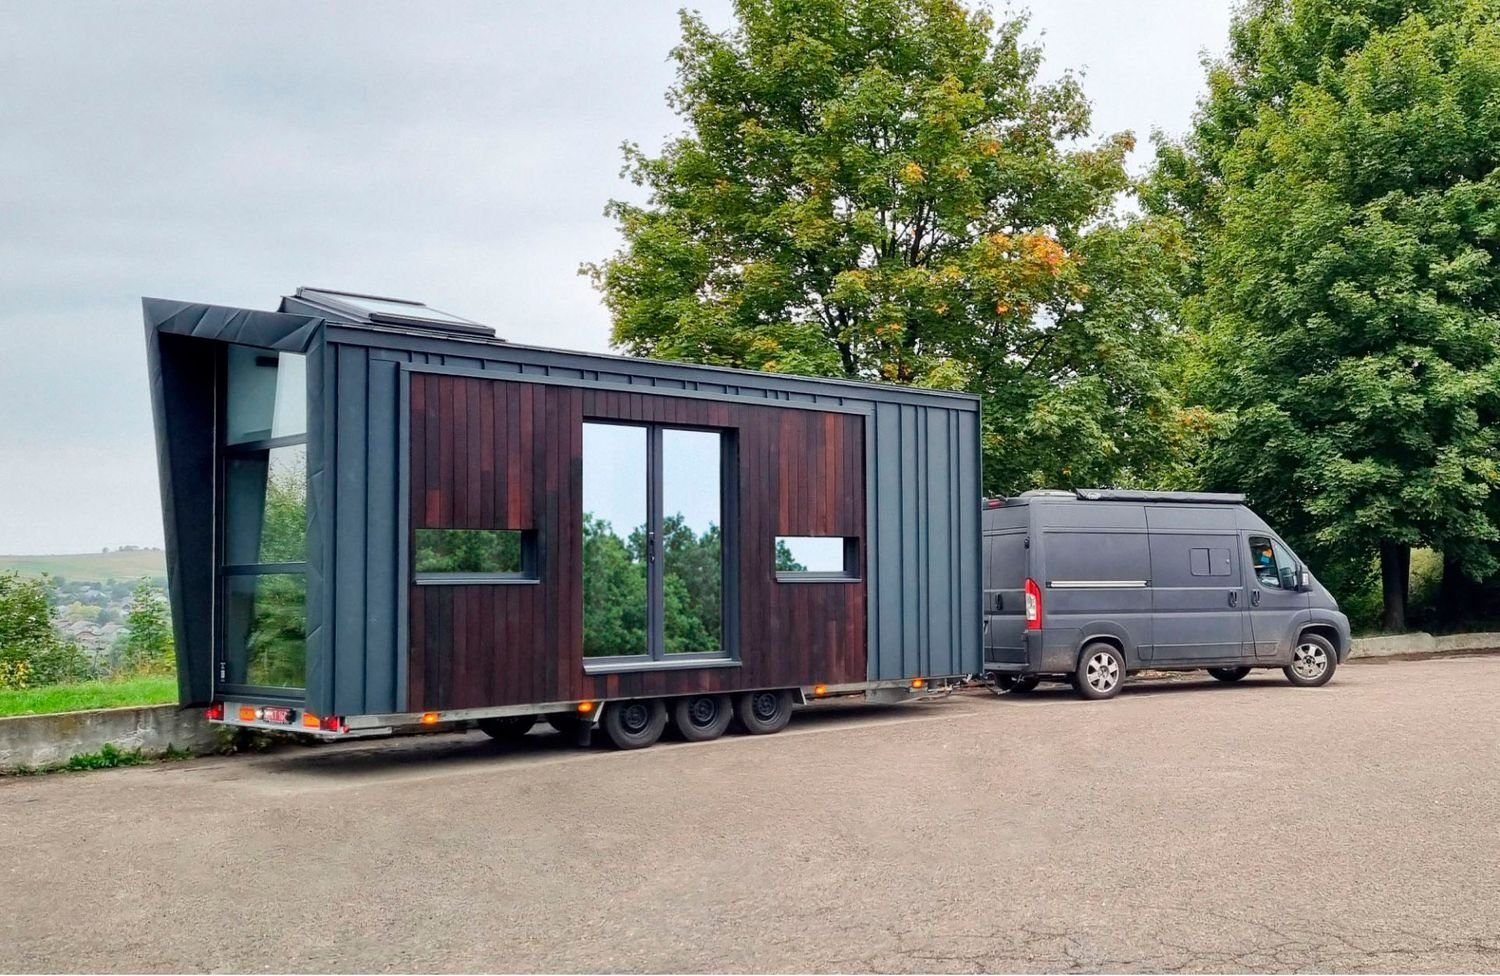 TinyHouse Company Hauszelt Container Haus, Modulhaus, Minihaus, 16.72 m2 - Modell 0